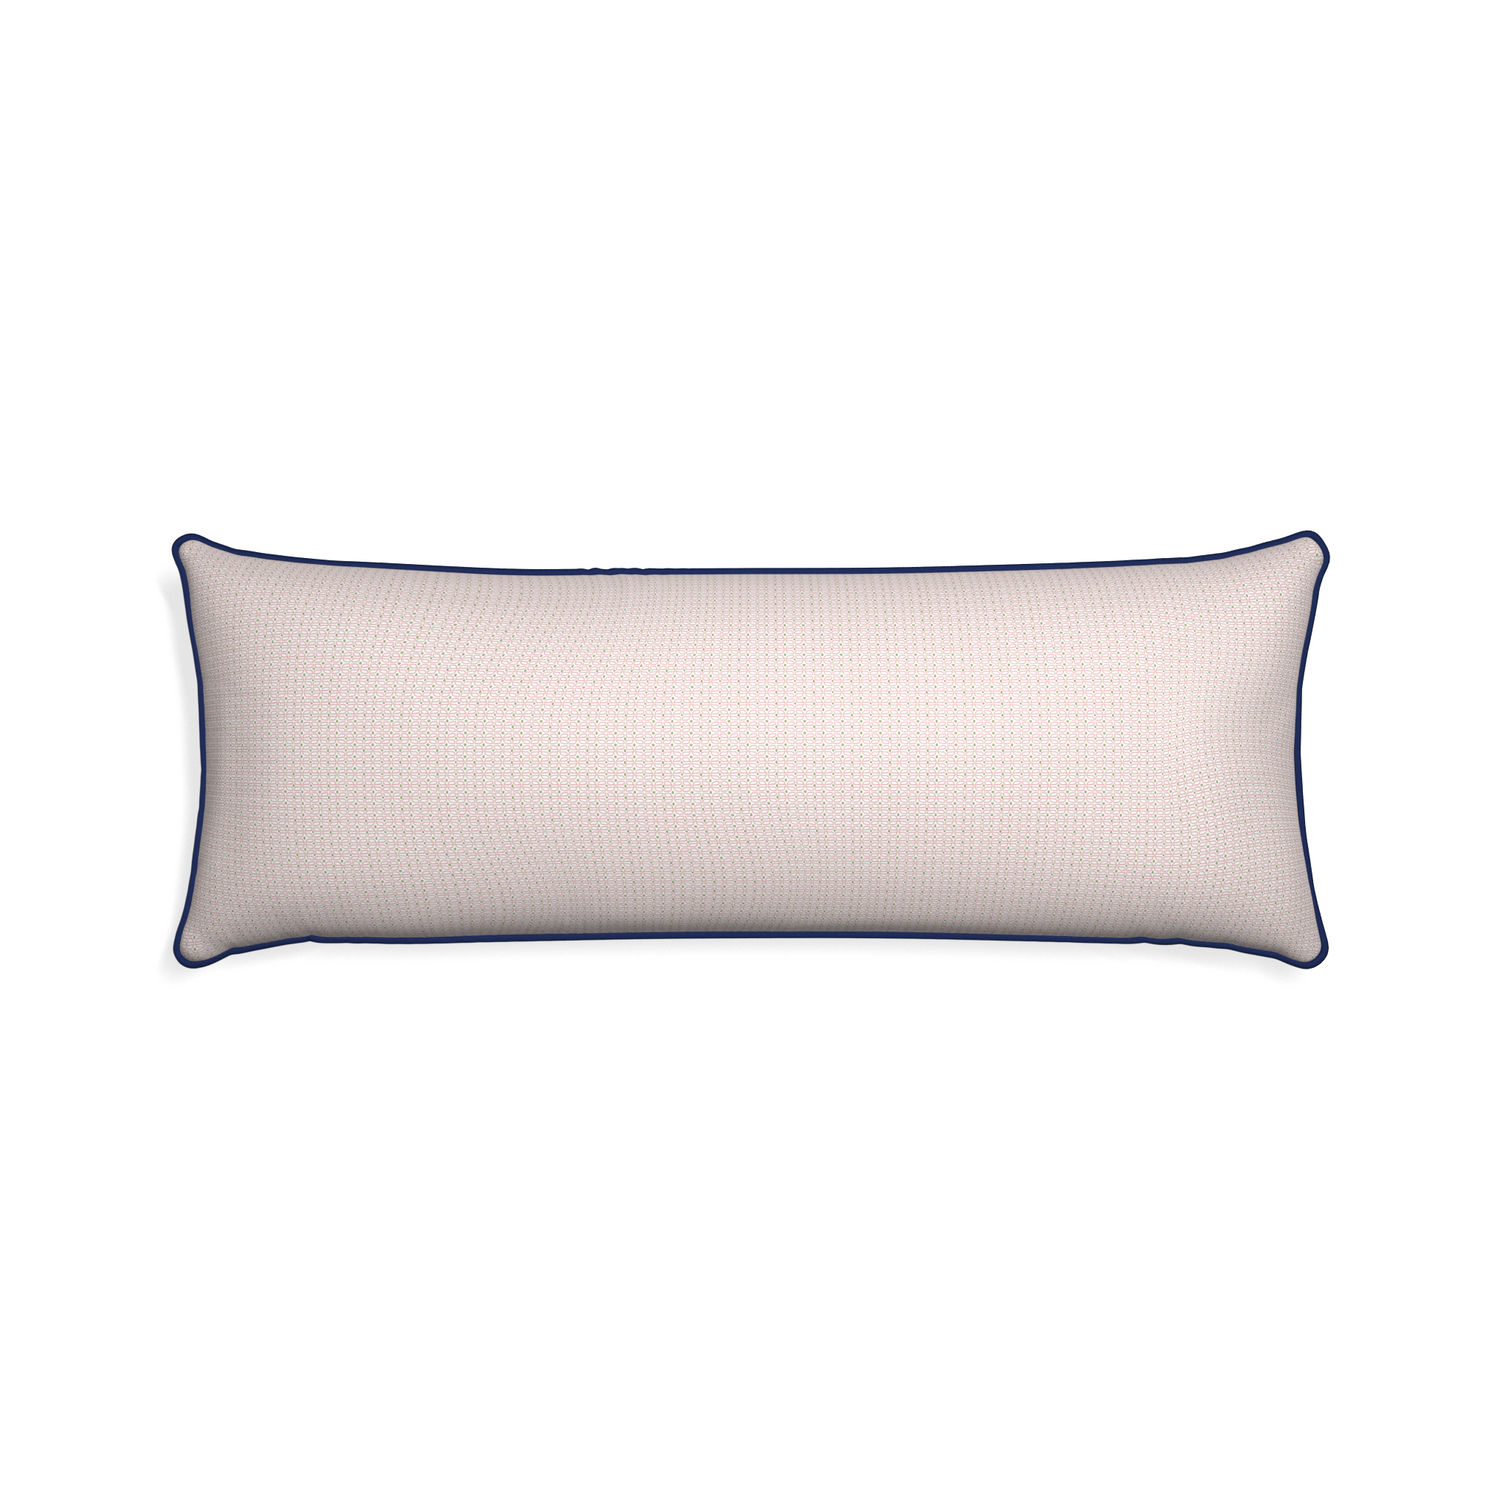 Xl-lumbar loomi pink custom pink geometricpillow with midnight piping on white background